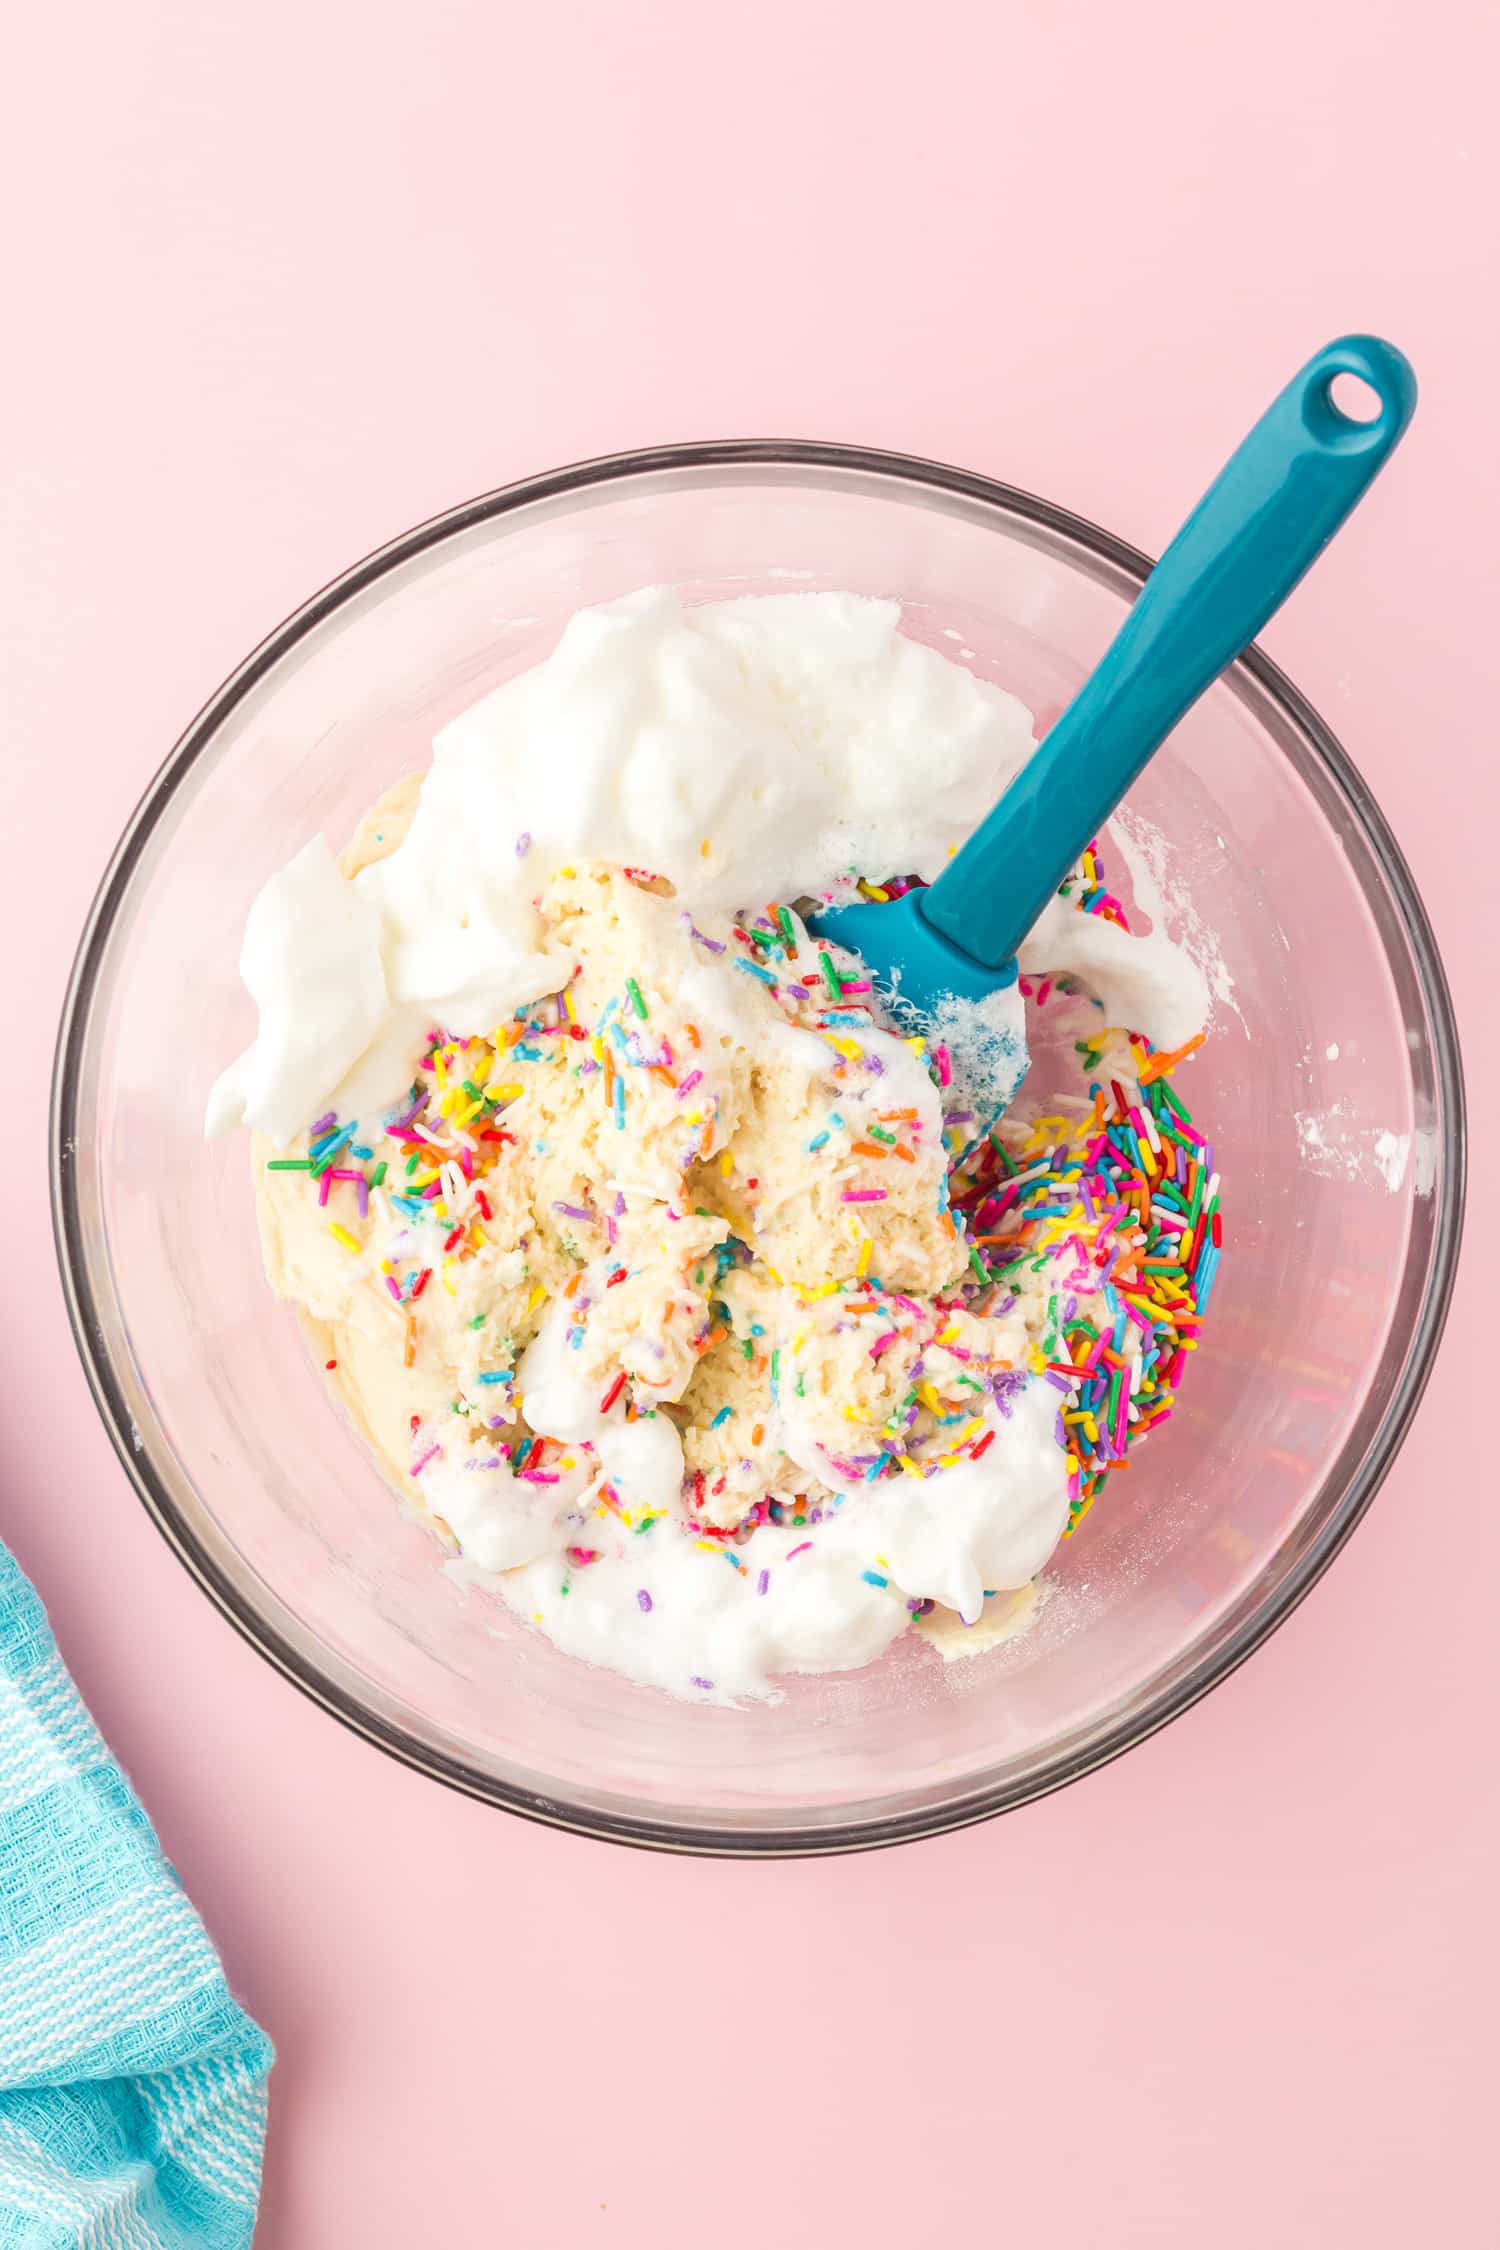 Glass bowl of whipped egg whites being folded into Funfetti cupcake batter with teal blue spatula